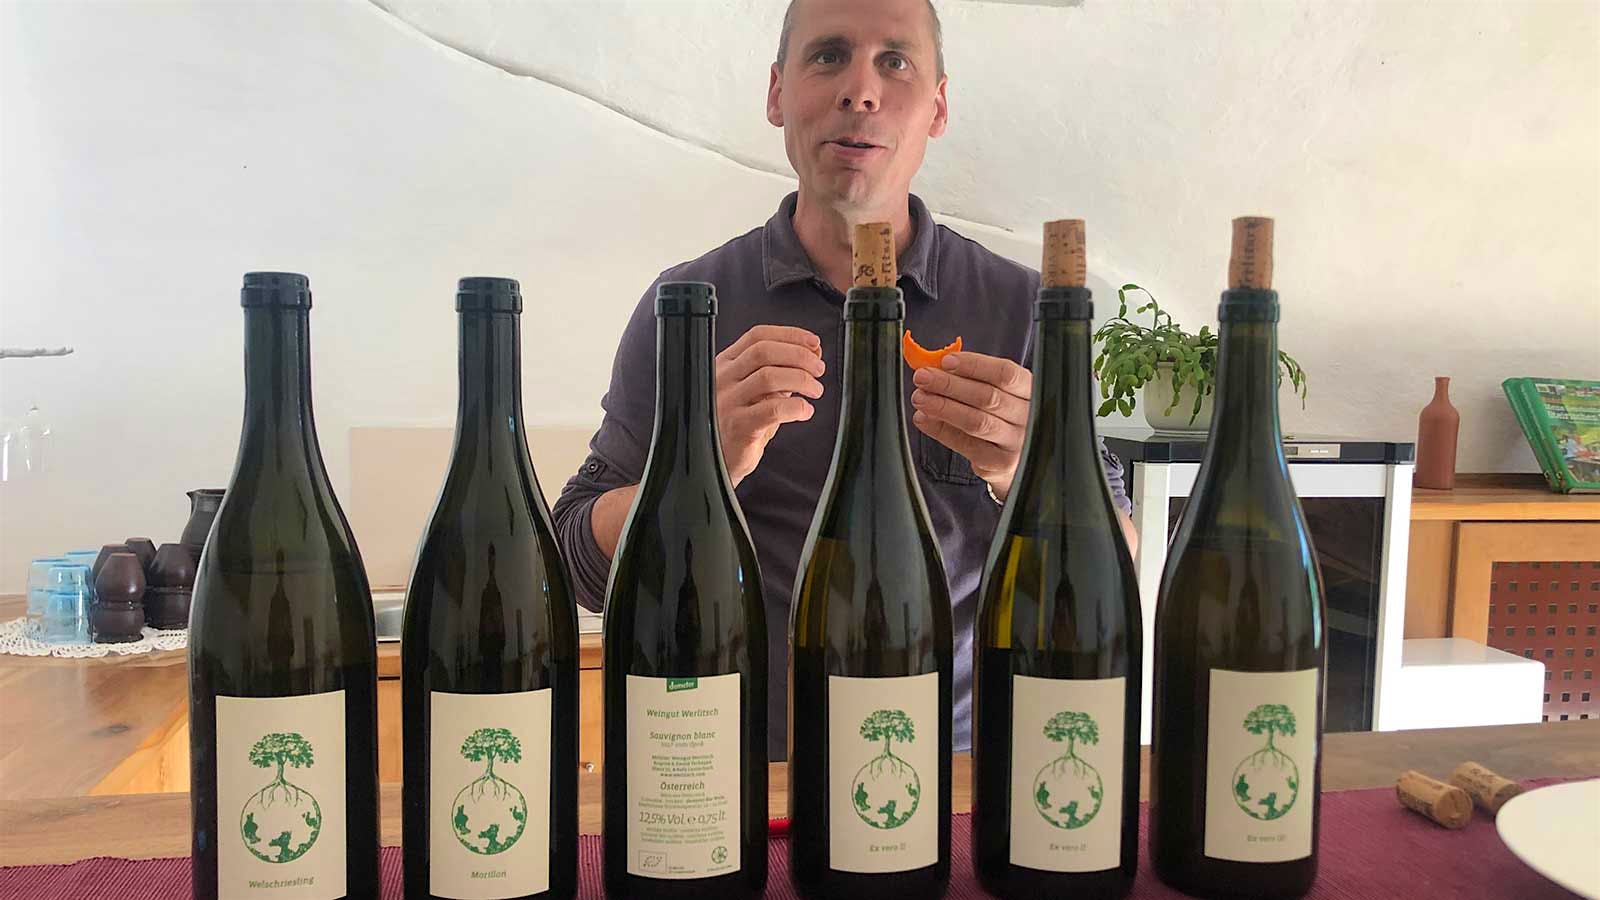 Ewald Tscheppe presents a wine (and carrot) tasting